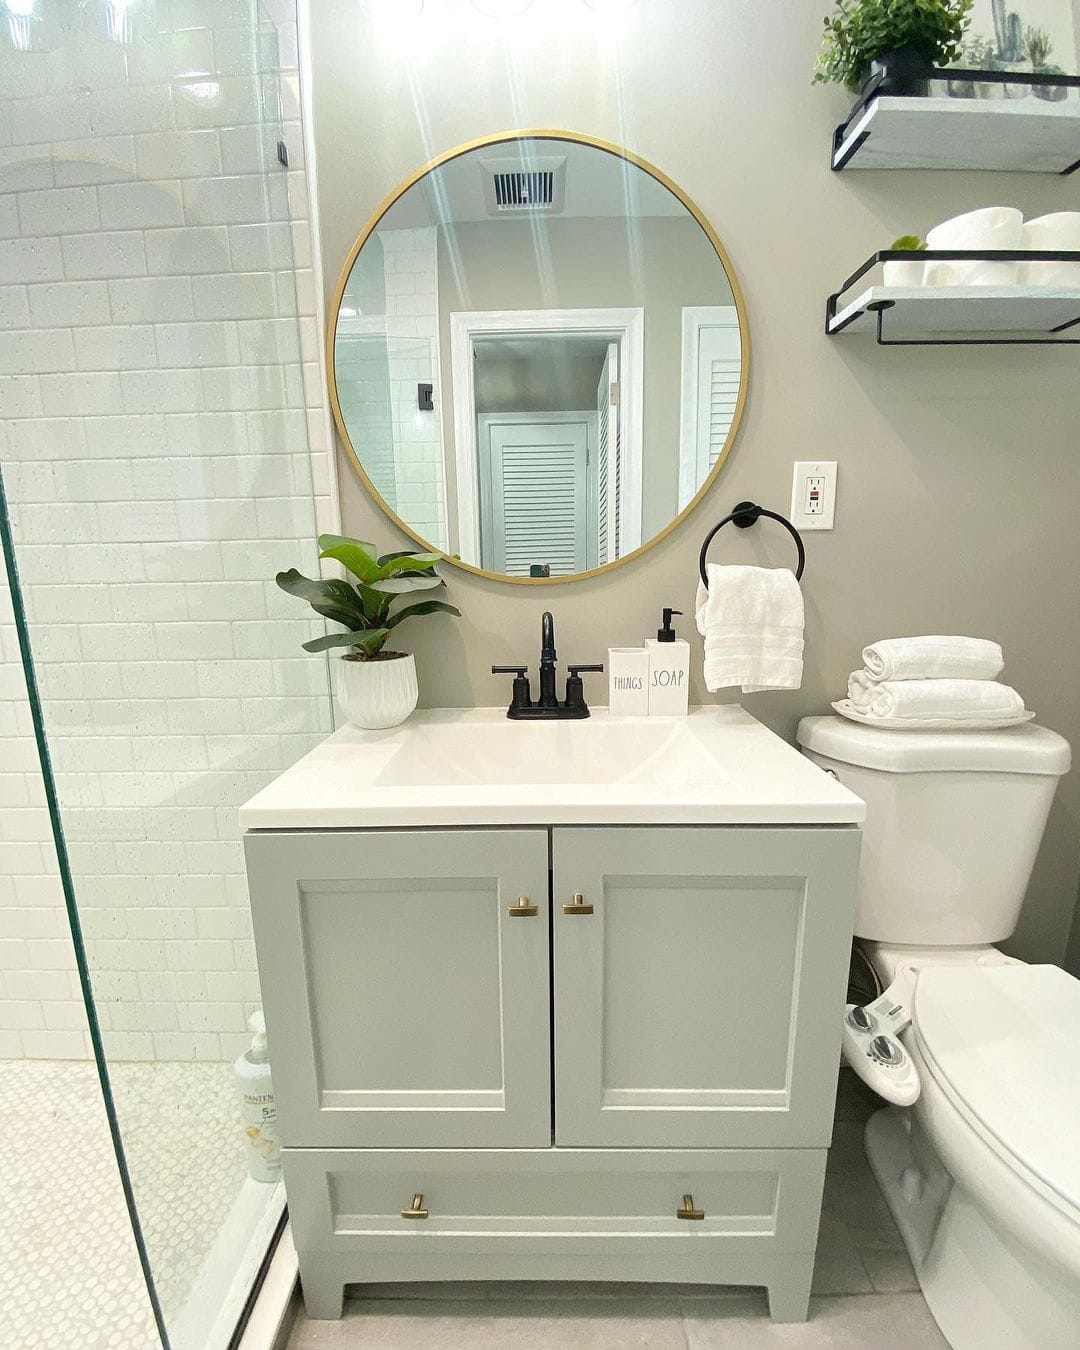 Perfectly Sized Vanity Saves Space - Soul & Lane